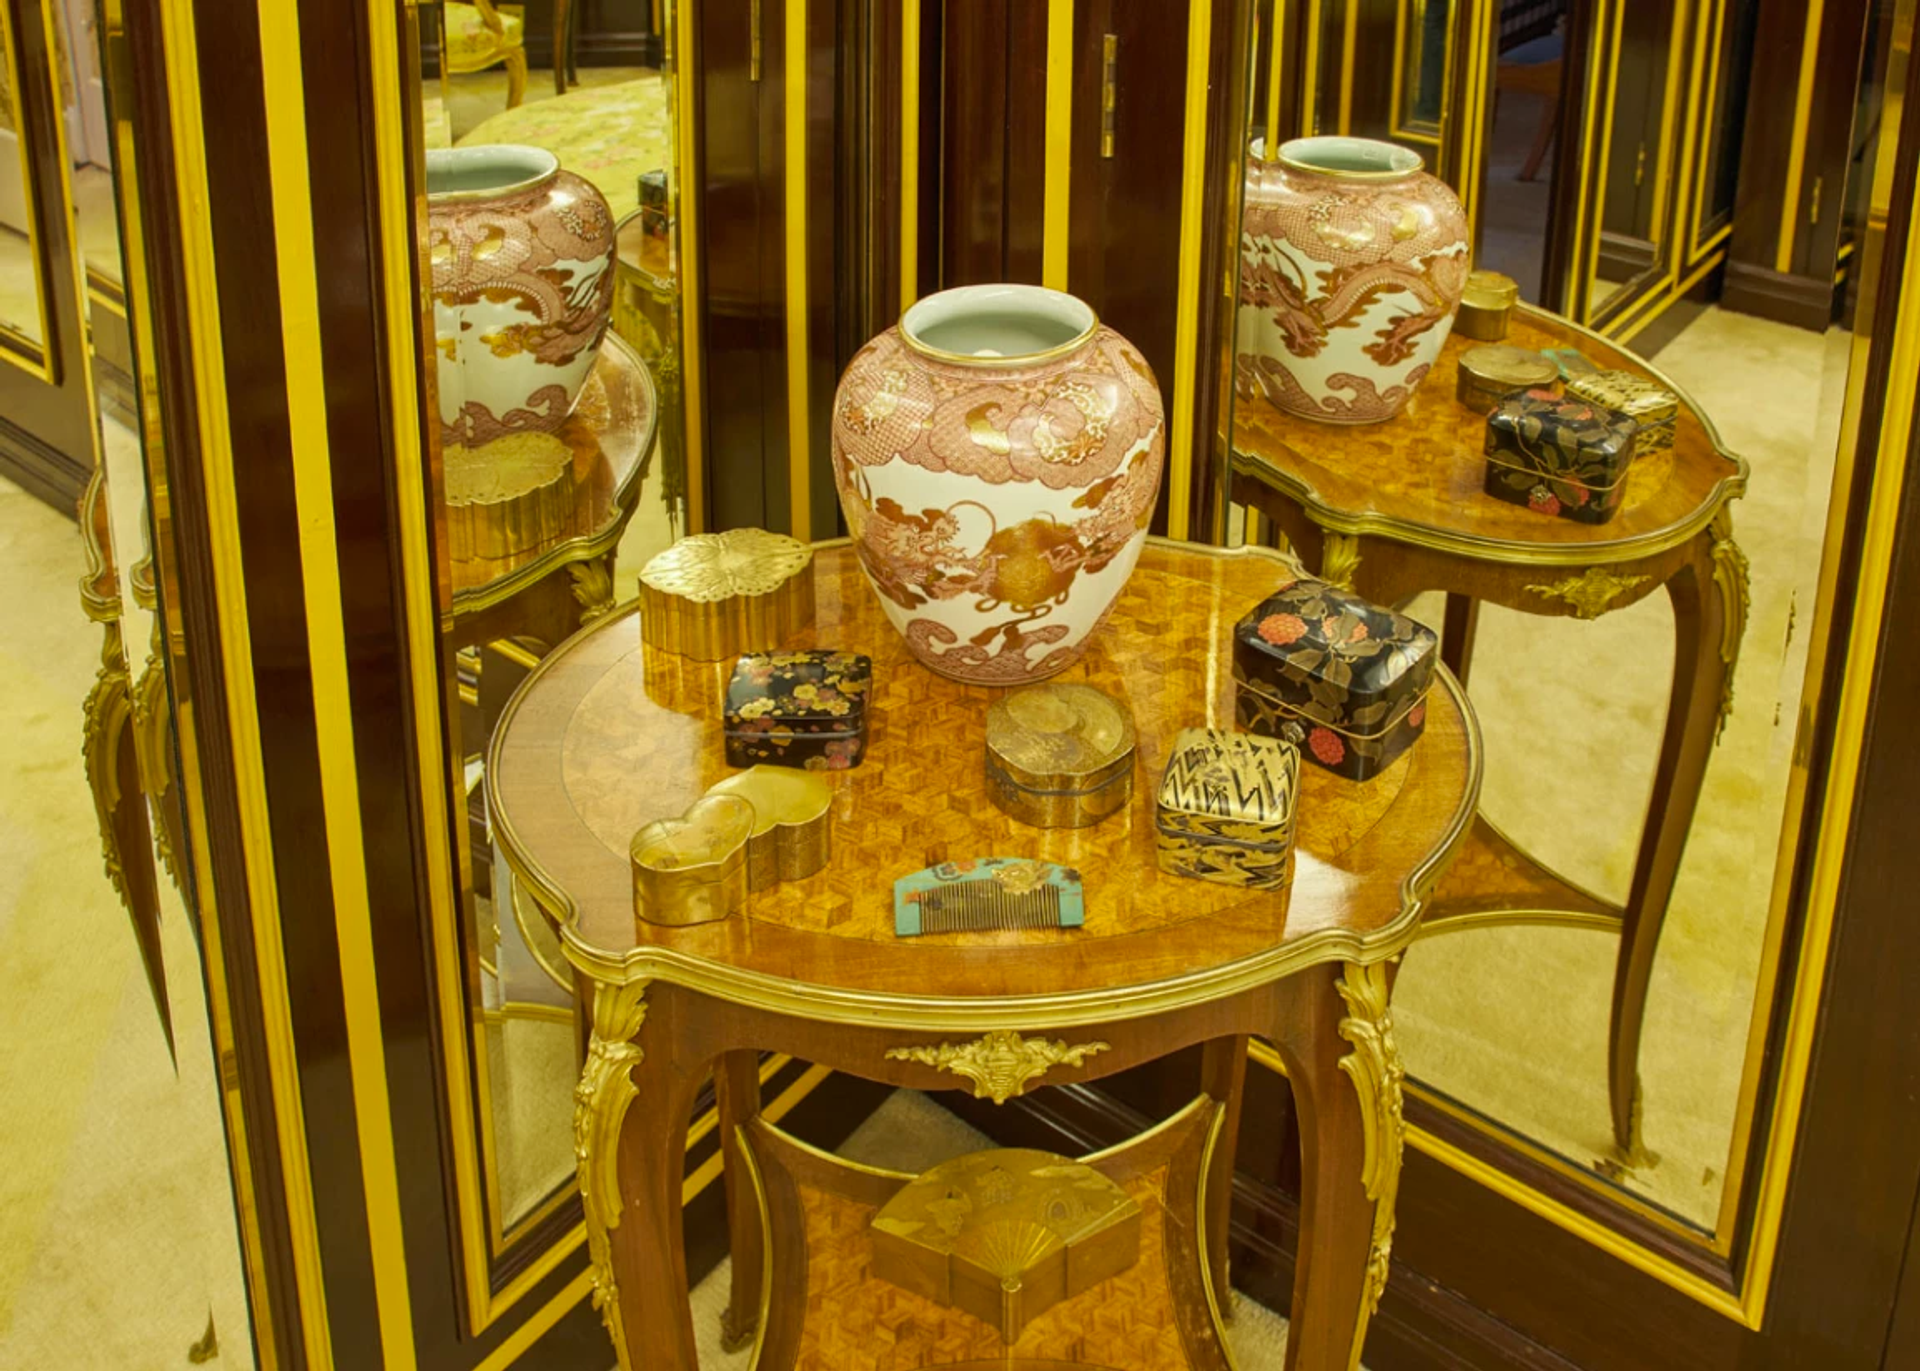 An image of Mercury's dressing room, showing a mirrored table covered in small lacquer boxes in the Japanese style.